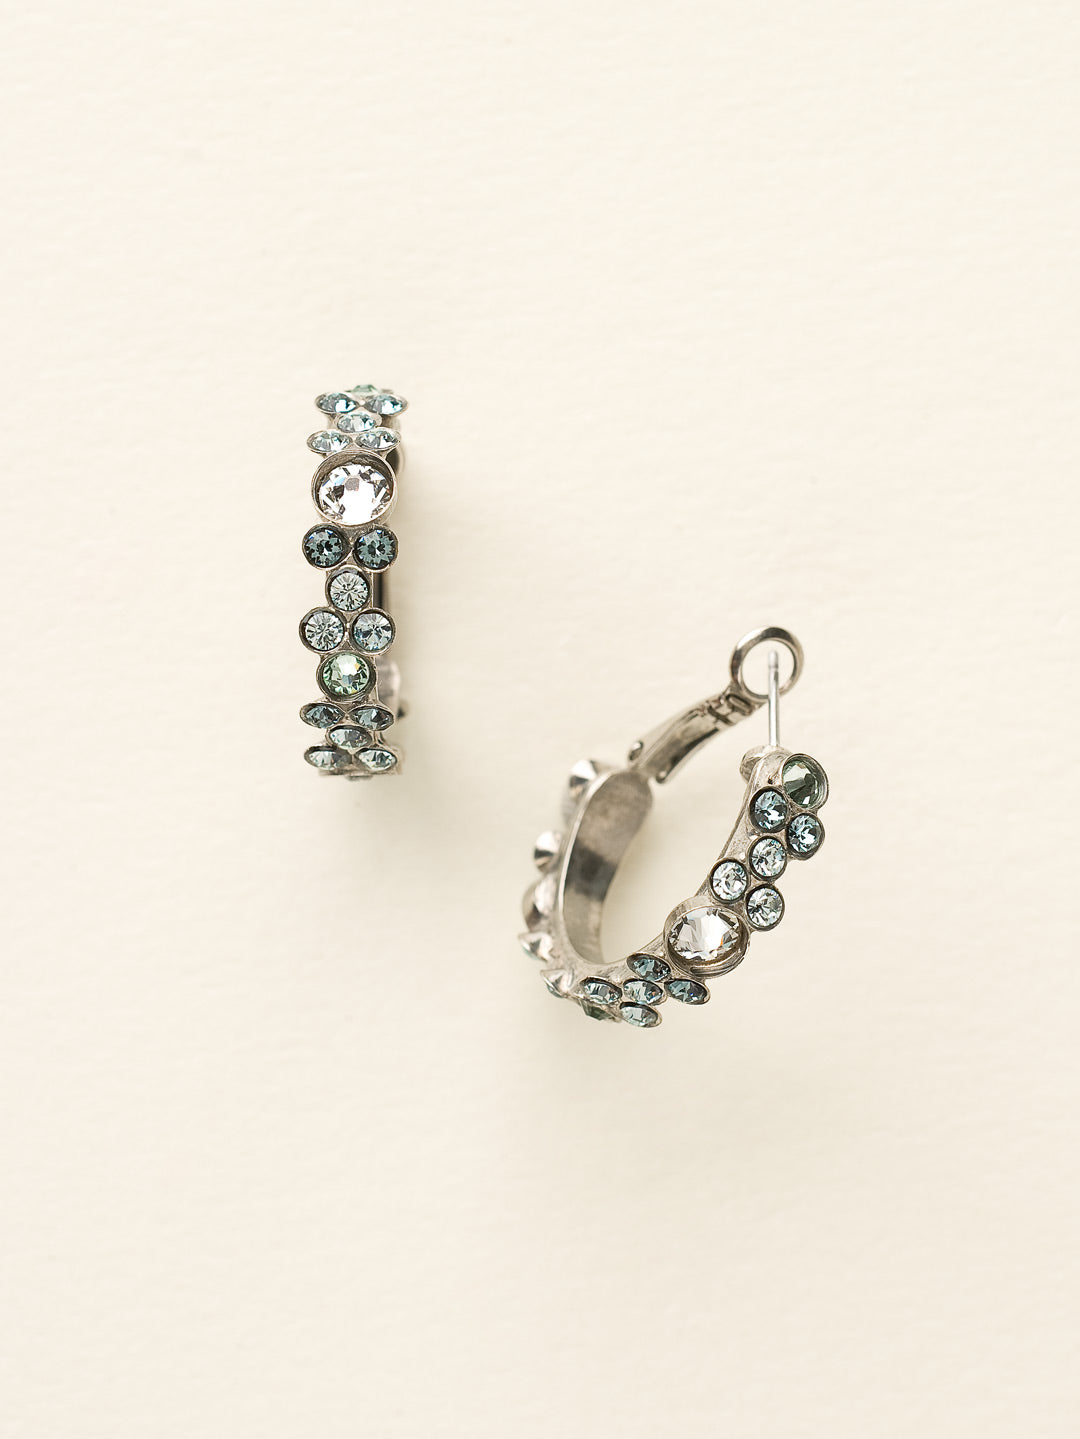 Floral Hoop Earrings - EBP15ASSEA - <p>Intricate design, infused with gorgeous shine. A motif of floral clusters is featured here on a small, delicate hoop with a hinged post backing. From Sorrelli's Seaside collection in our Antique Silver-tone finish.</p>